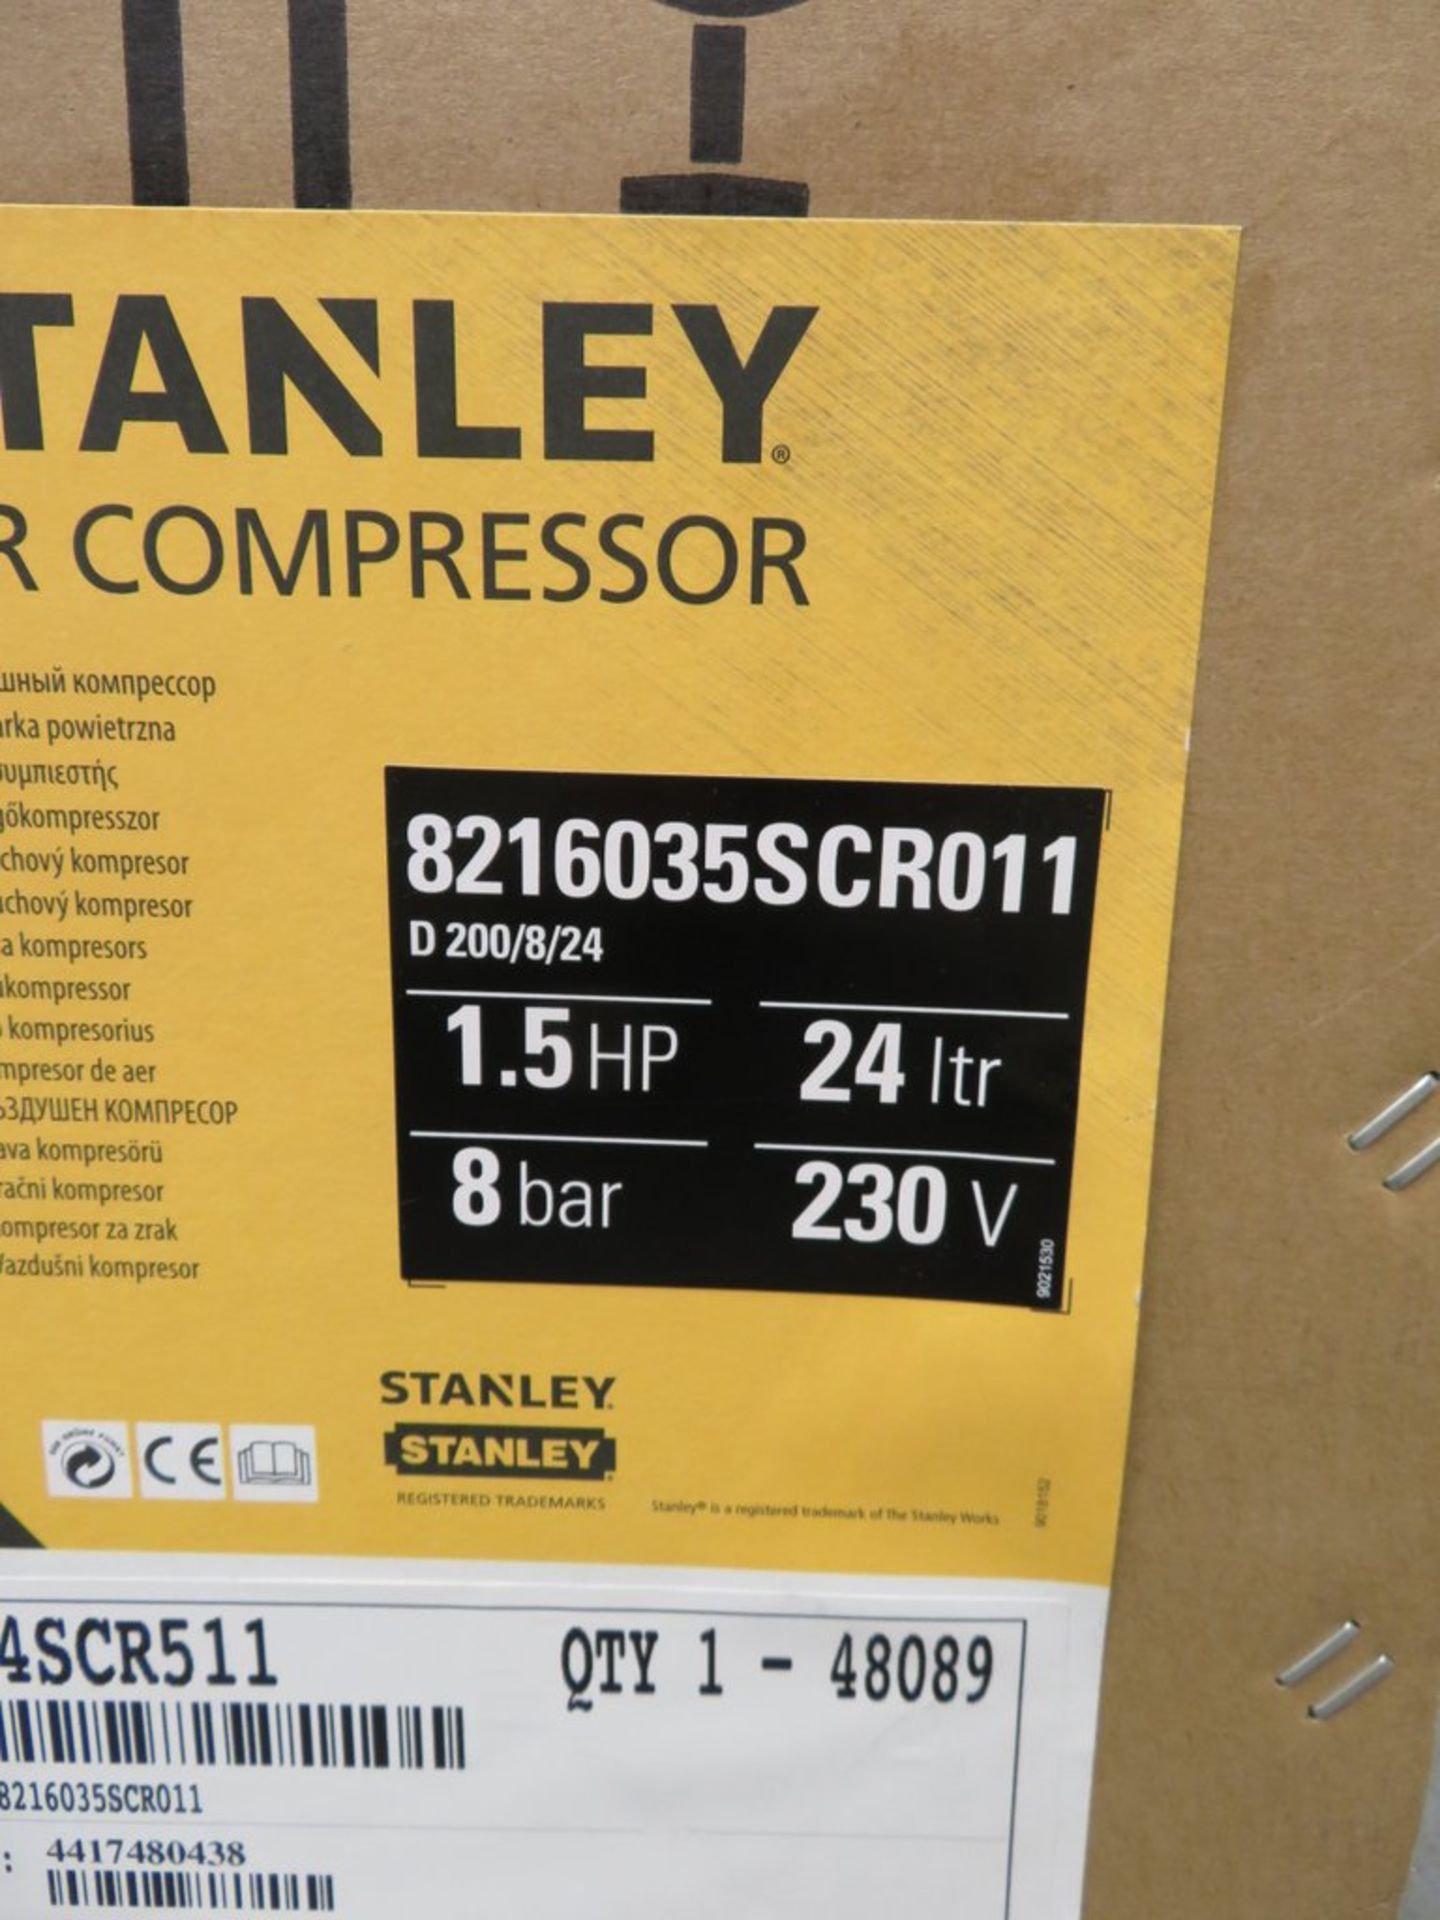 Stanley 24 Litre Electrical Air Compressor, With Accessories Kit. Model: 8216035SCR011. 230v. - Image 14 of 14